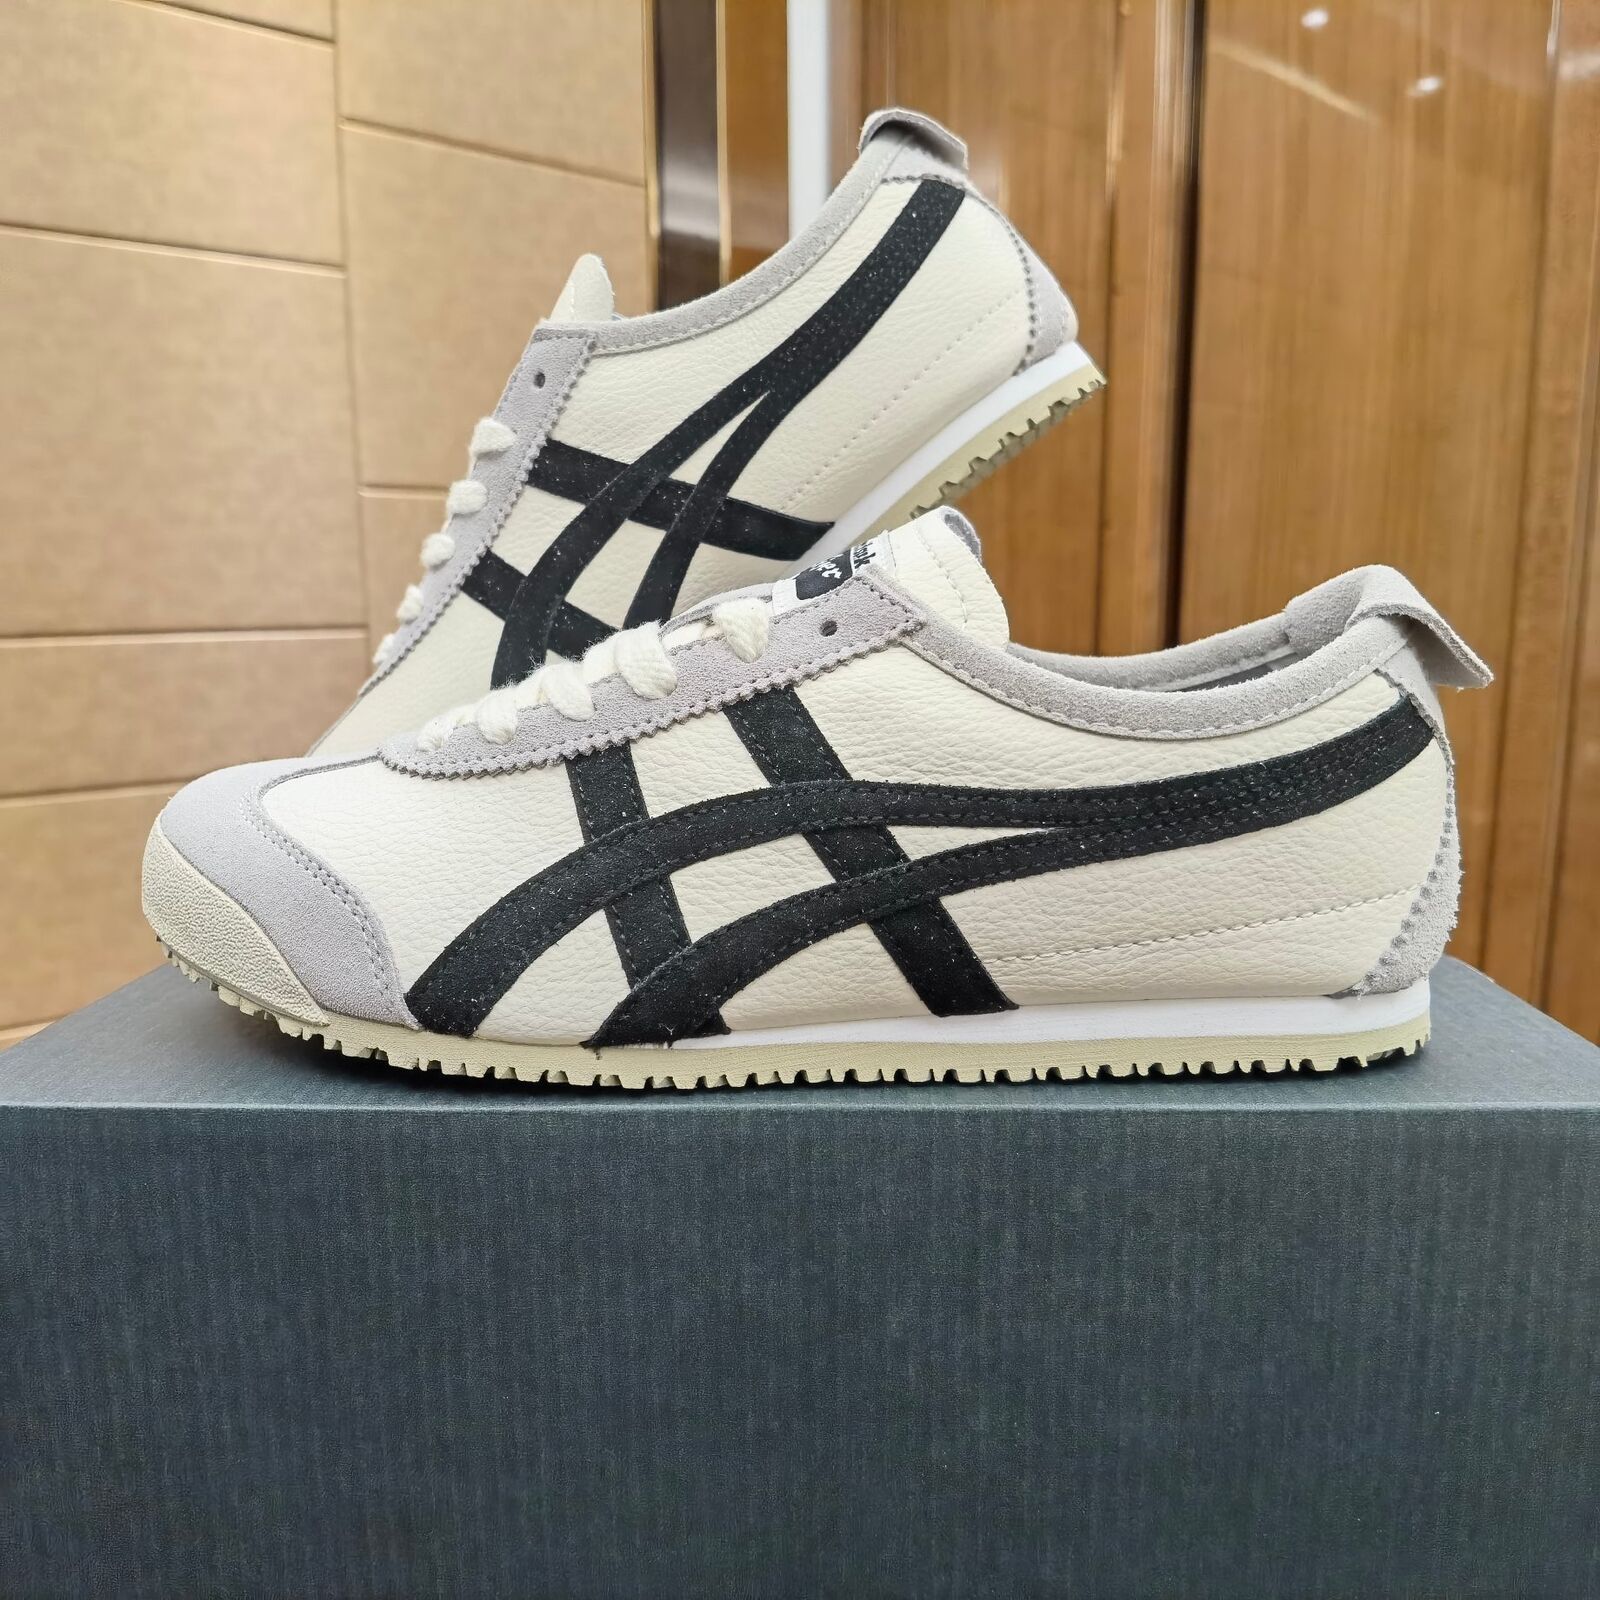 [HOT] Onitsuka Tiger MEXICO 66 Sneakers 1183B391 200 Beige/Black Unisex Shoes